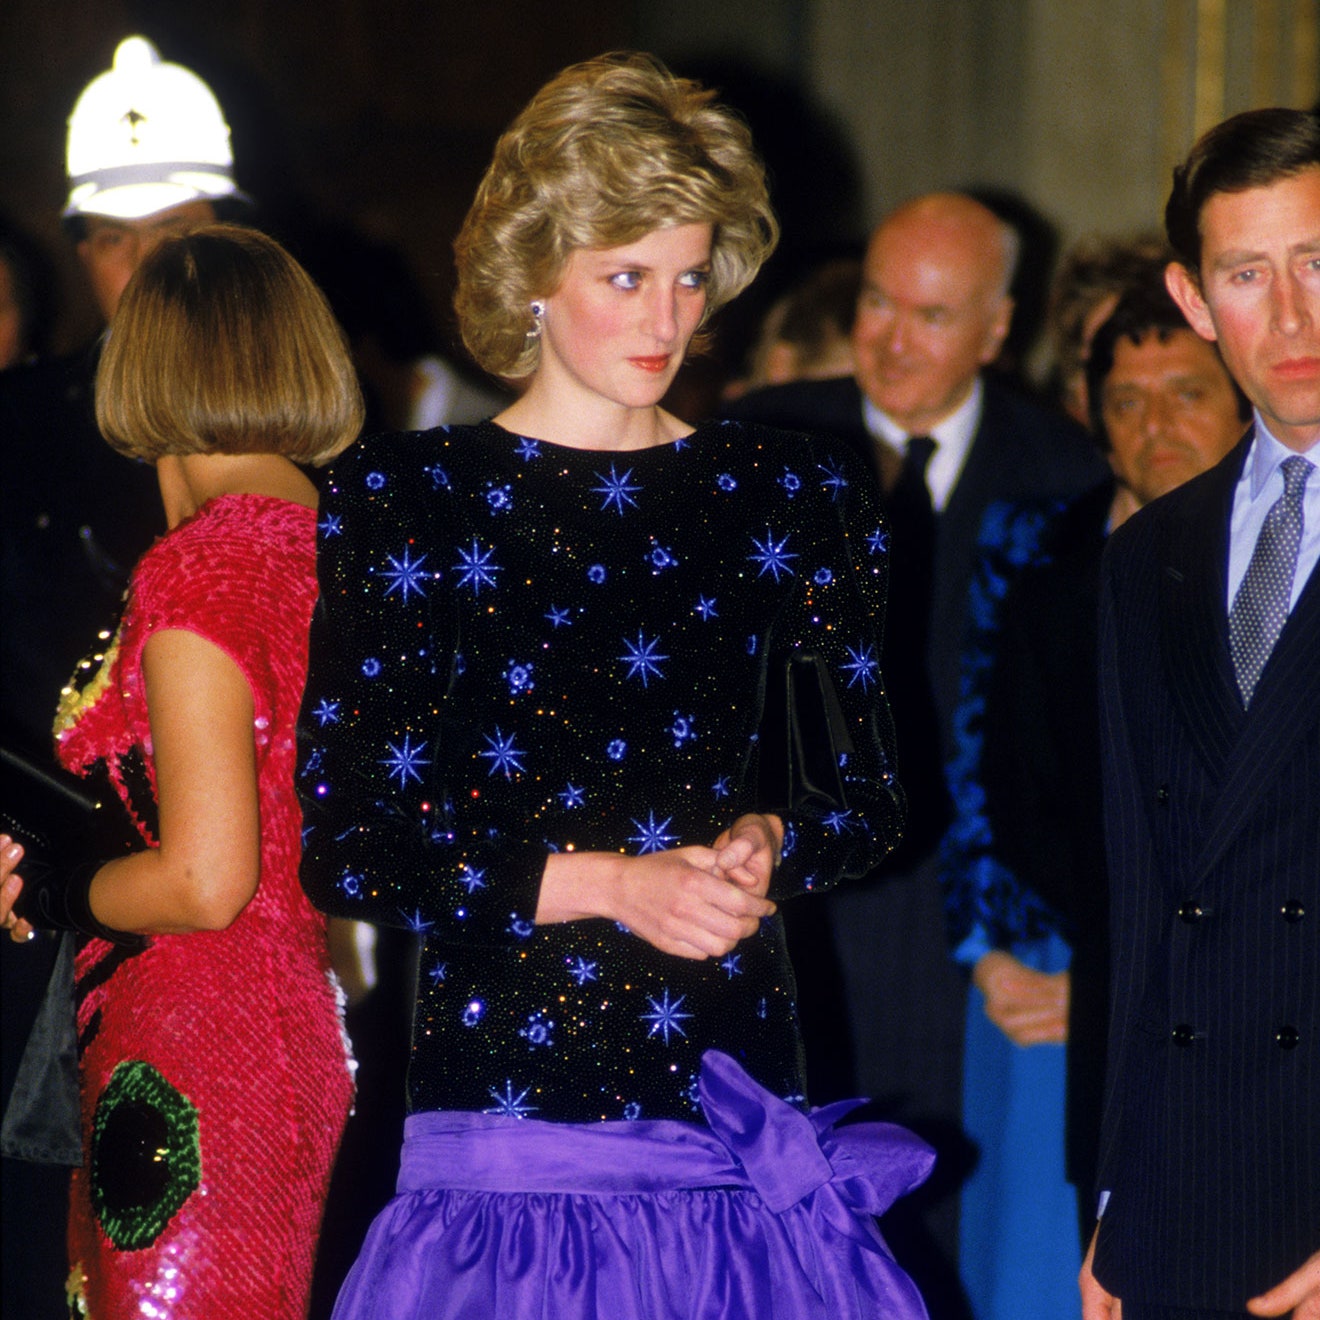 Princess Diana Dress Breaks Record at Auction, Selling for $1.1M